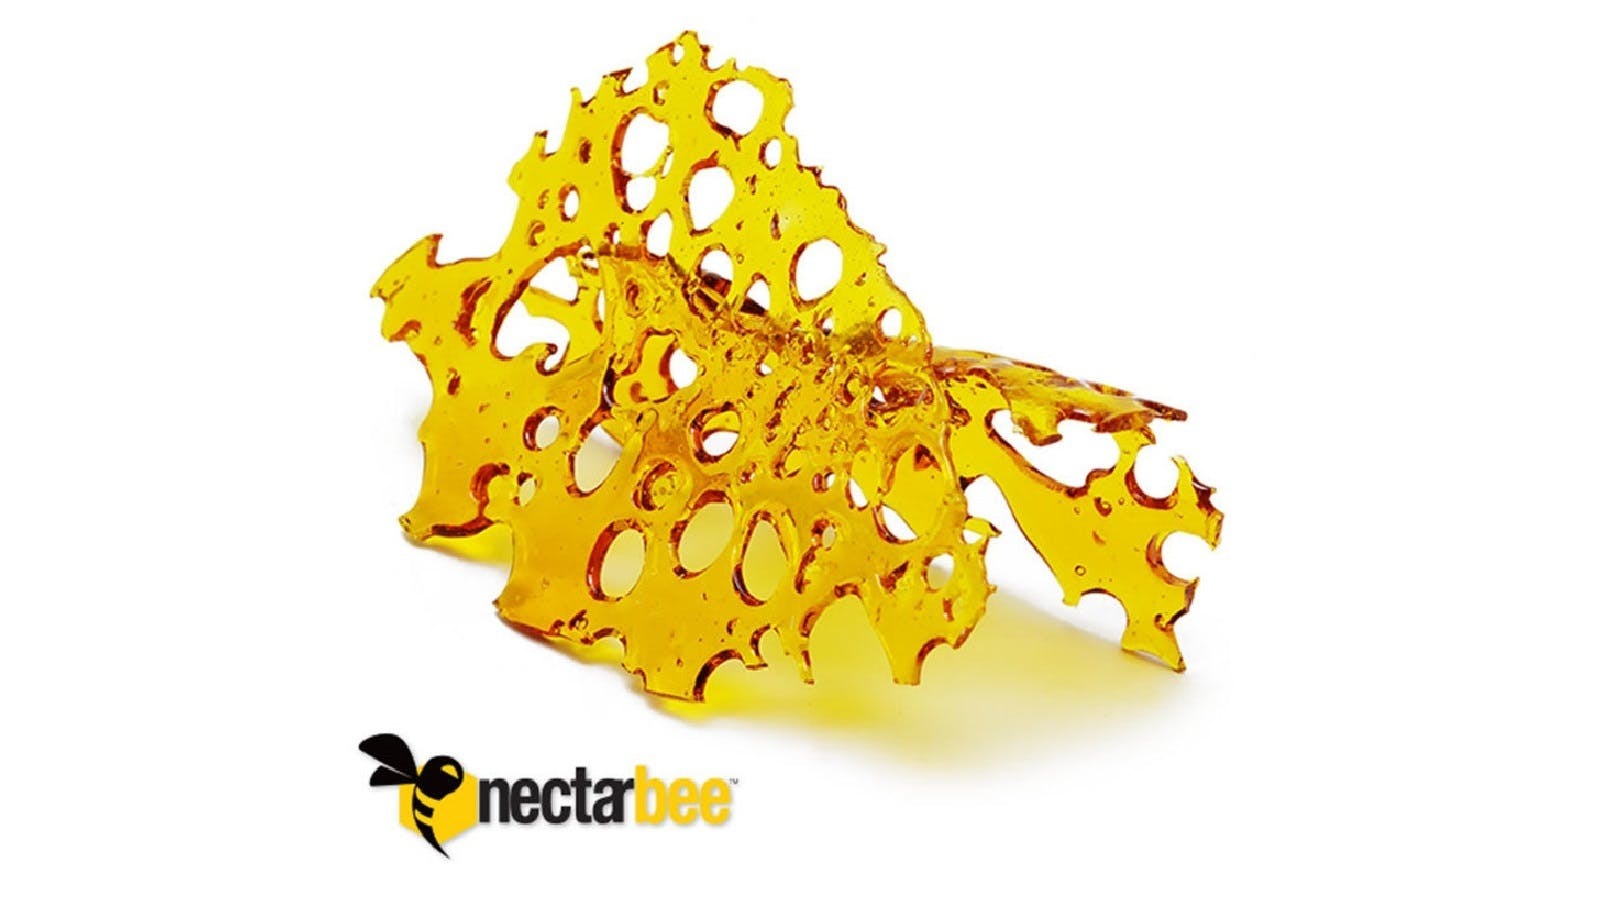 marijuana-dispensaries-the-green-solution-union-station-in-denver-nectarbee-pure-shatter